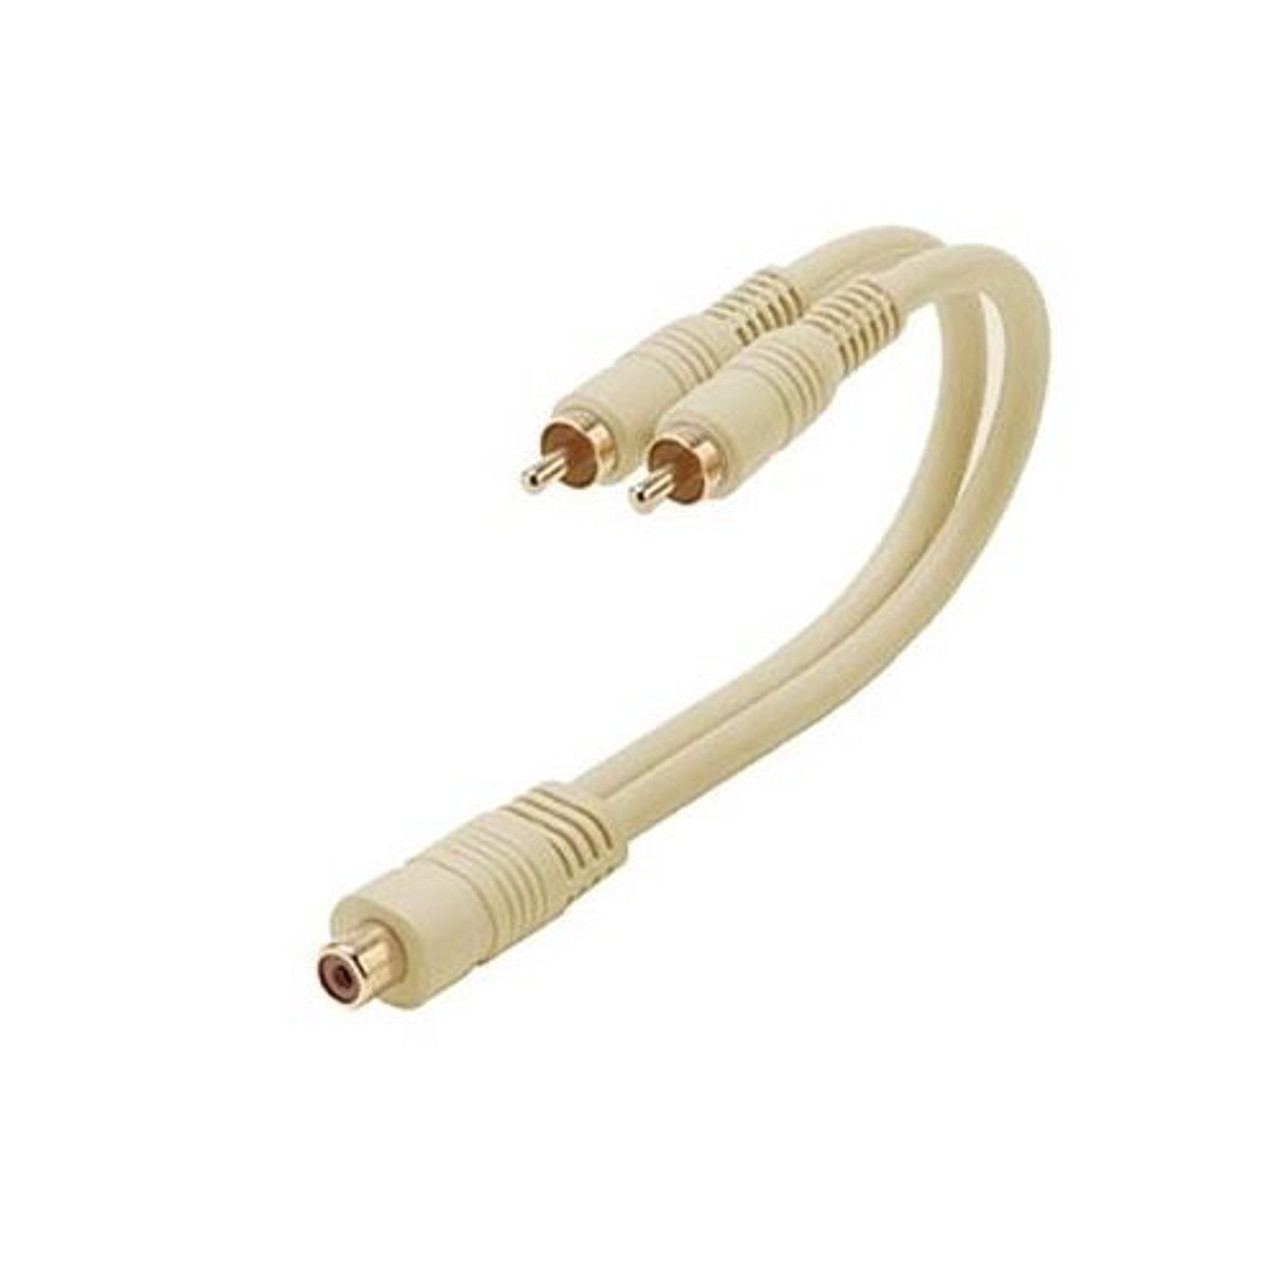 Steren 254-207IV 6" Inch Python 1 RCA Female 2 RCA Male Cable Y Splitter Ivory Gold Plate Home Theater Jack Splitter Adapter Fully Molded Heavy Duty Ultra Flex PVC Jacket Interconnect Cable